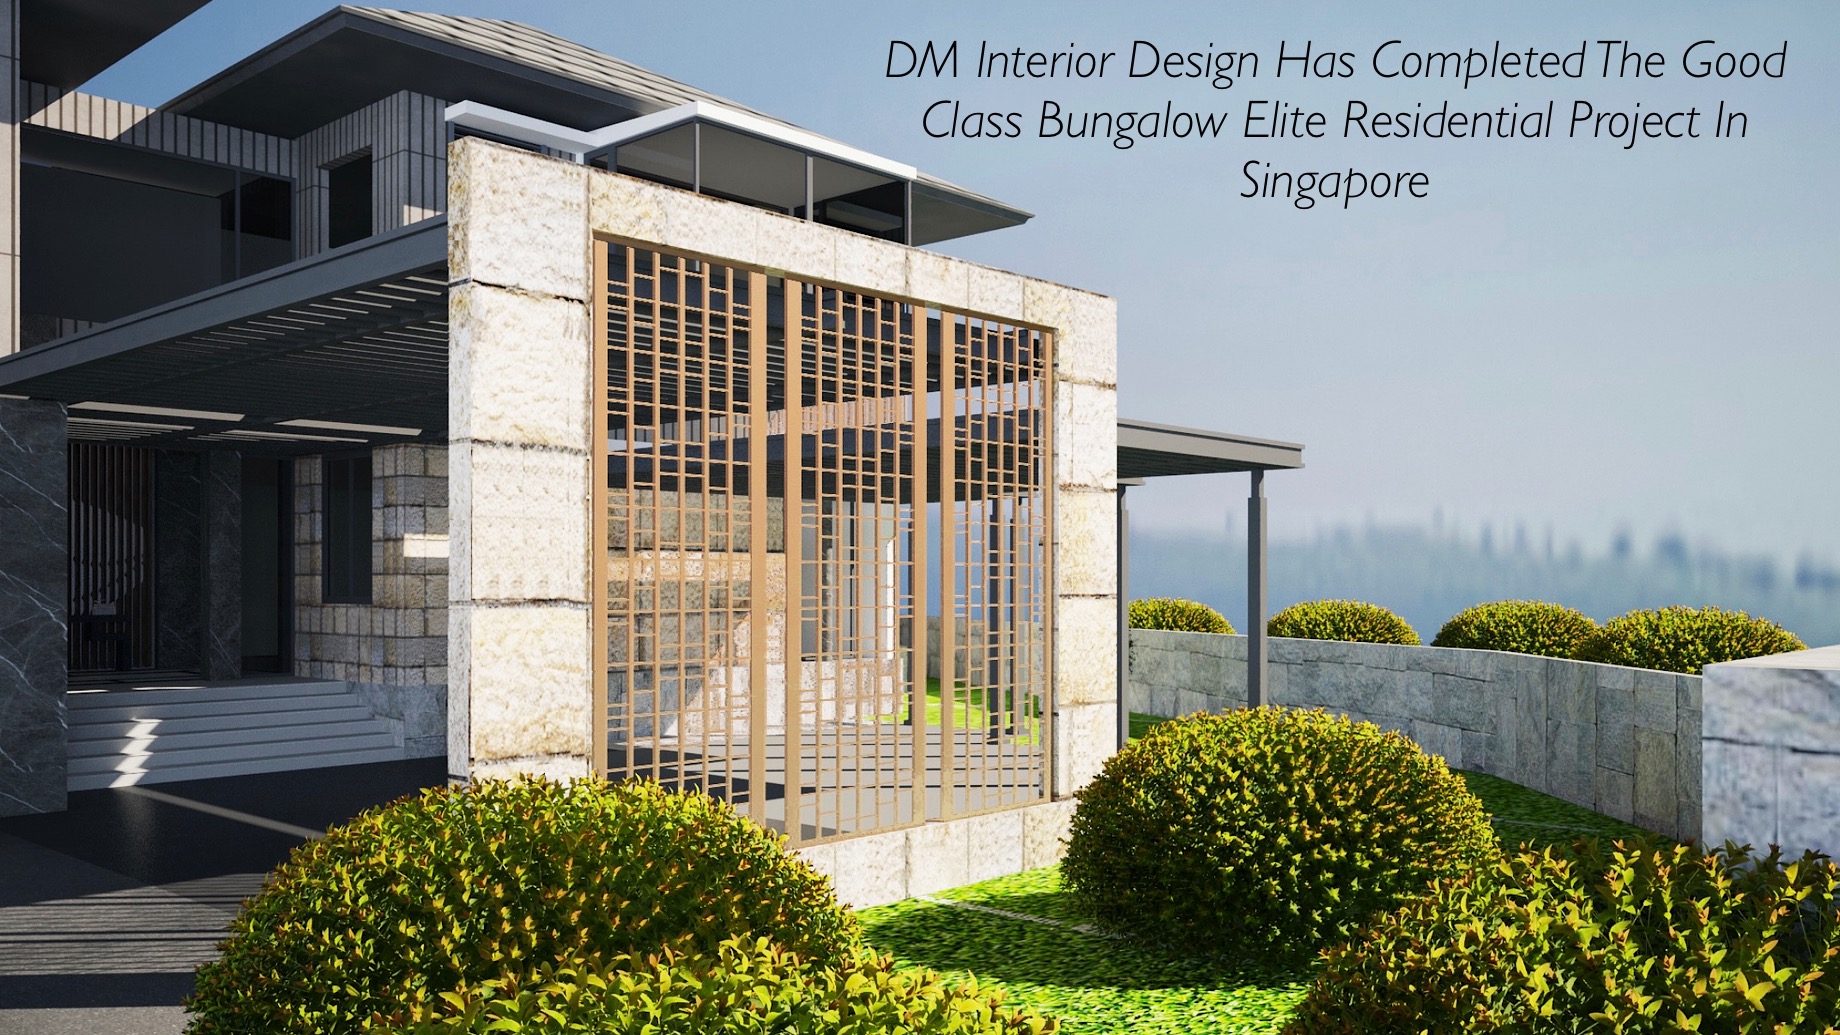 DM Interior Design Has Completed The Good Class Bungalow Elite Residential Project In Singapore